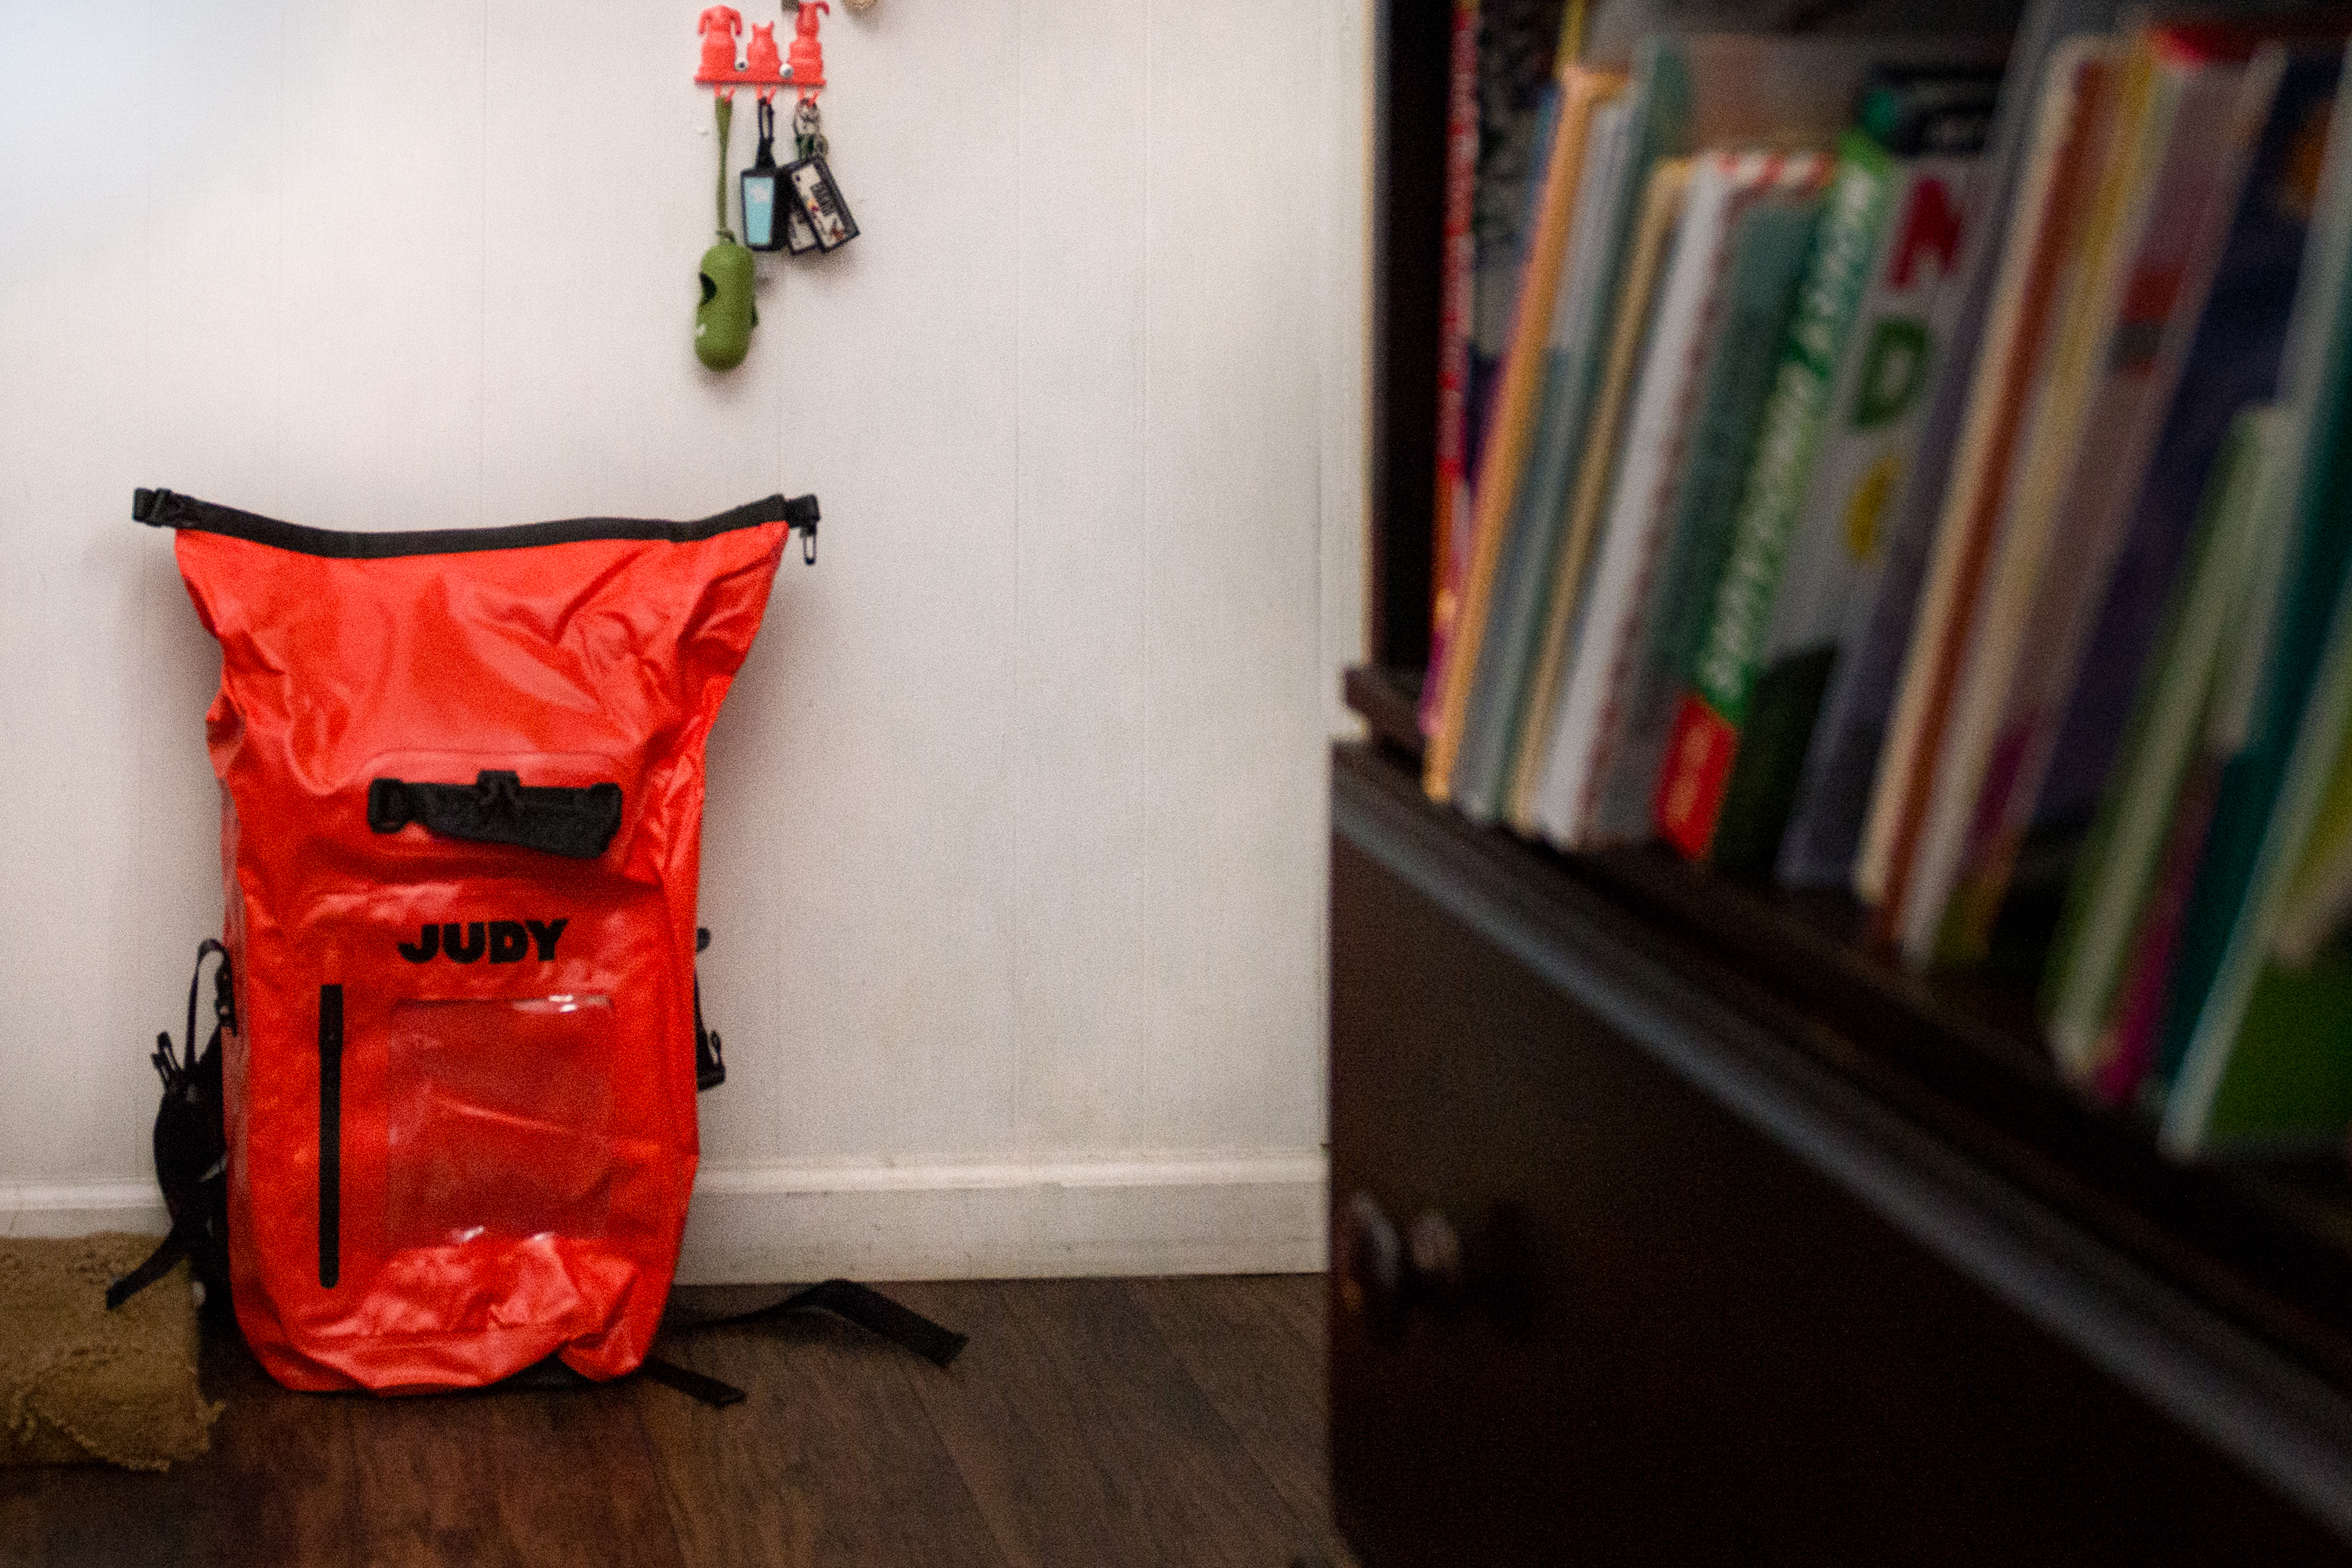 A photo shows a bright orange "go bag" resting on a wall inside.